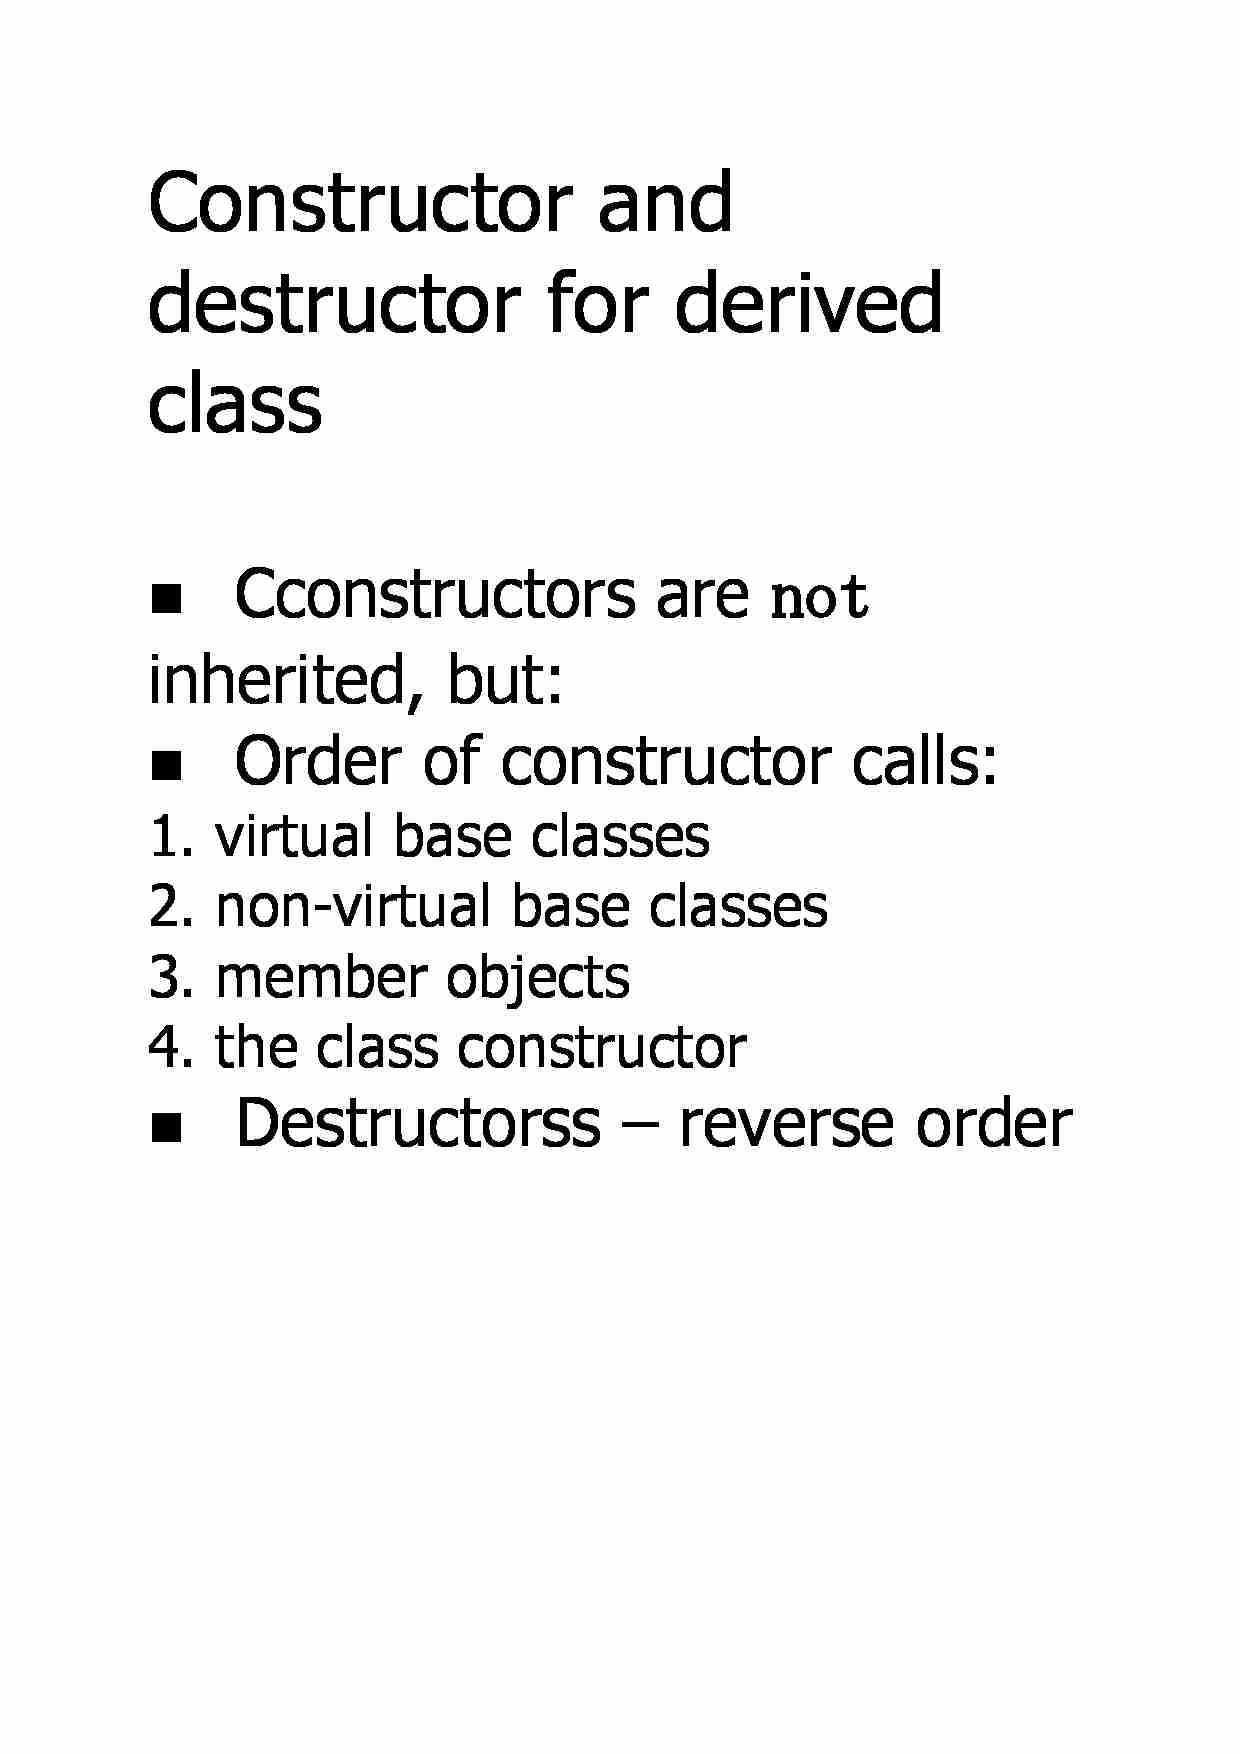 Constructor and destructor for derived class - strona 1